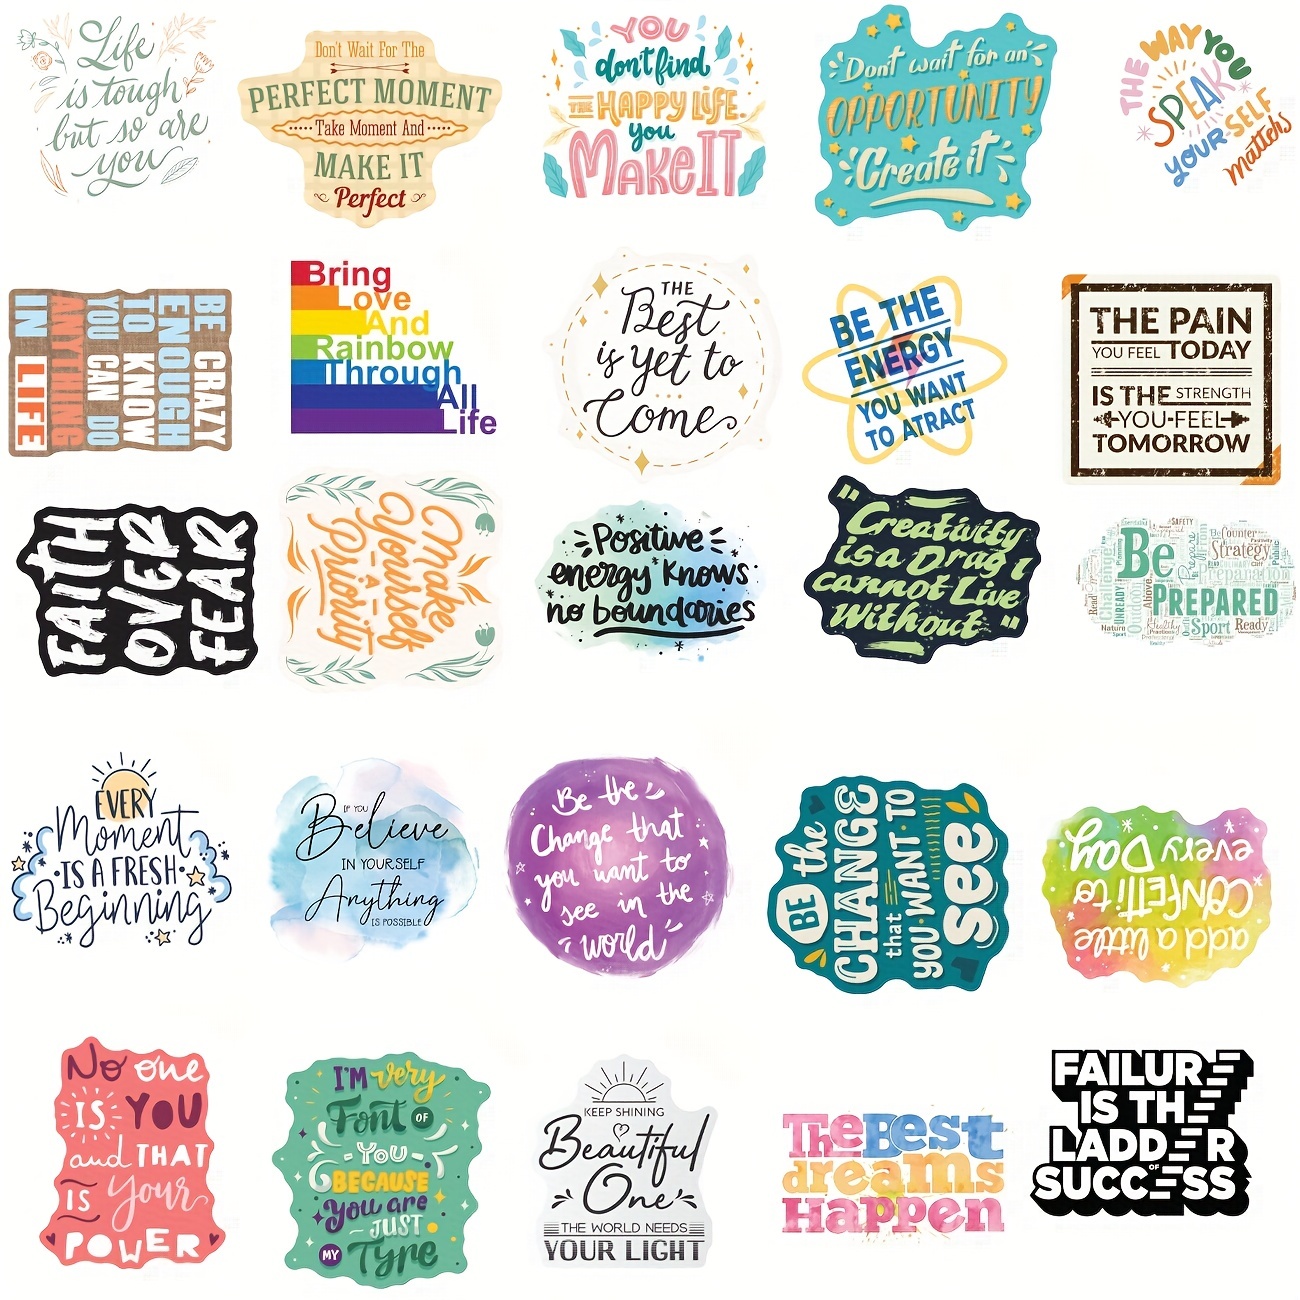 Affirmation Stickers Positive Stickers Do What Makes You Happy